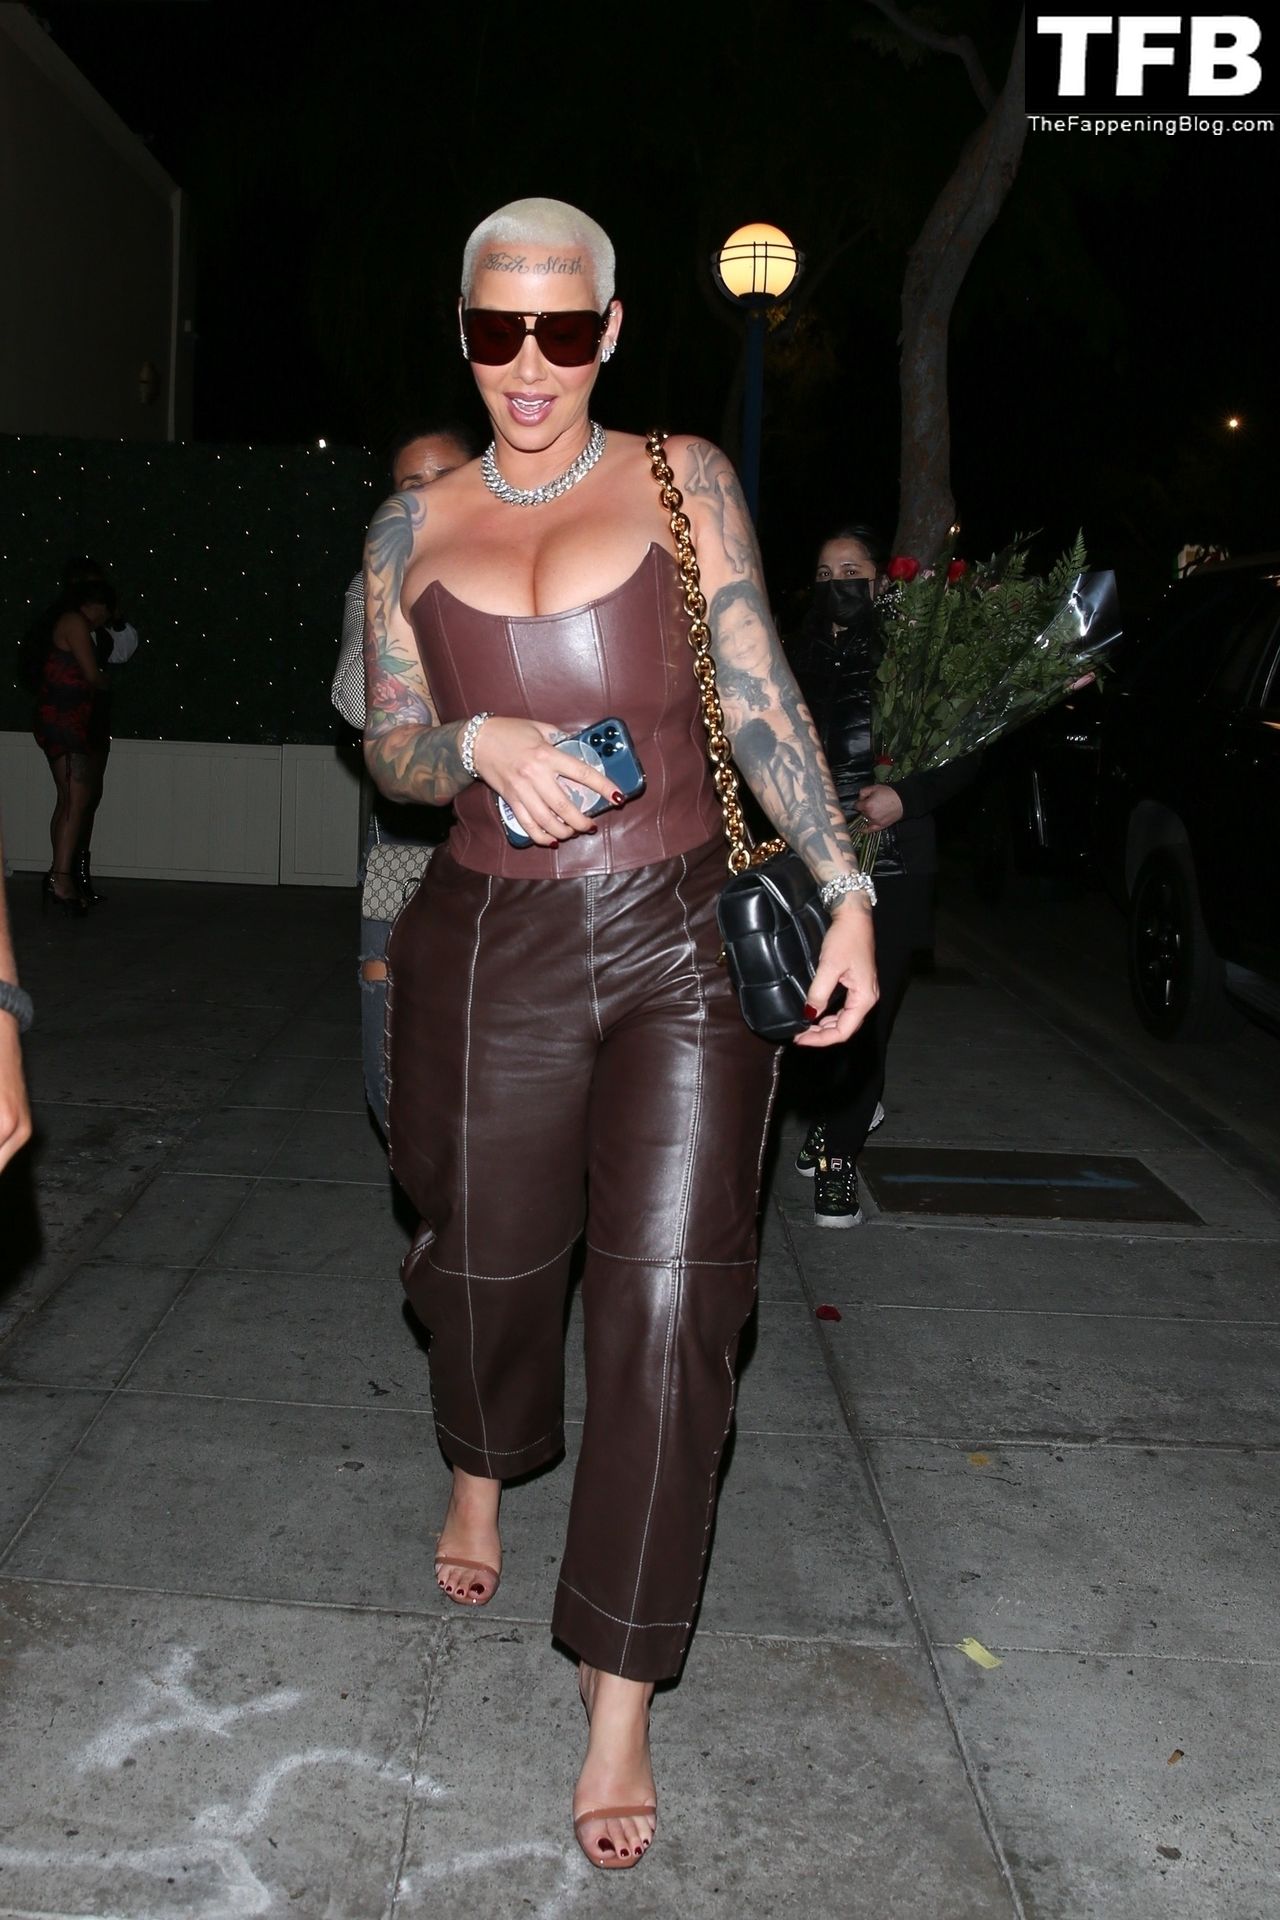 Amber-Rose-Sexy-The-Fappening-Blog-63.jpg